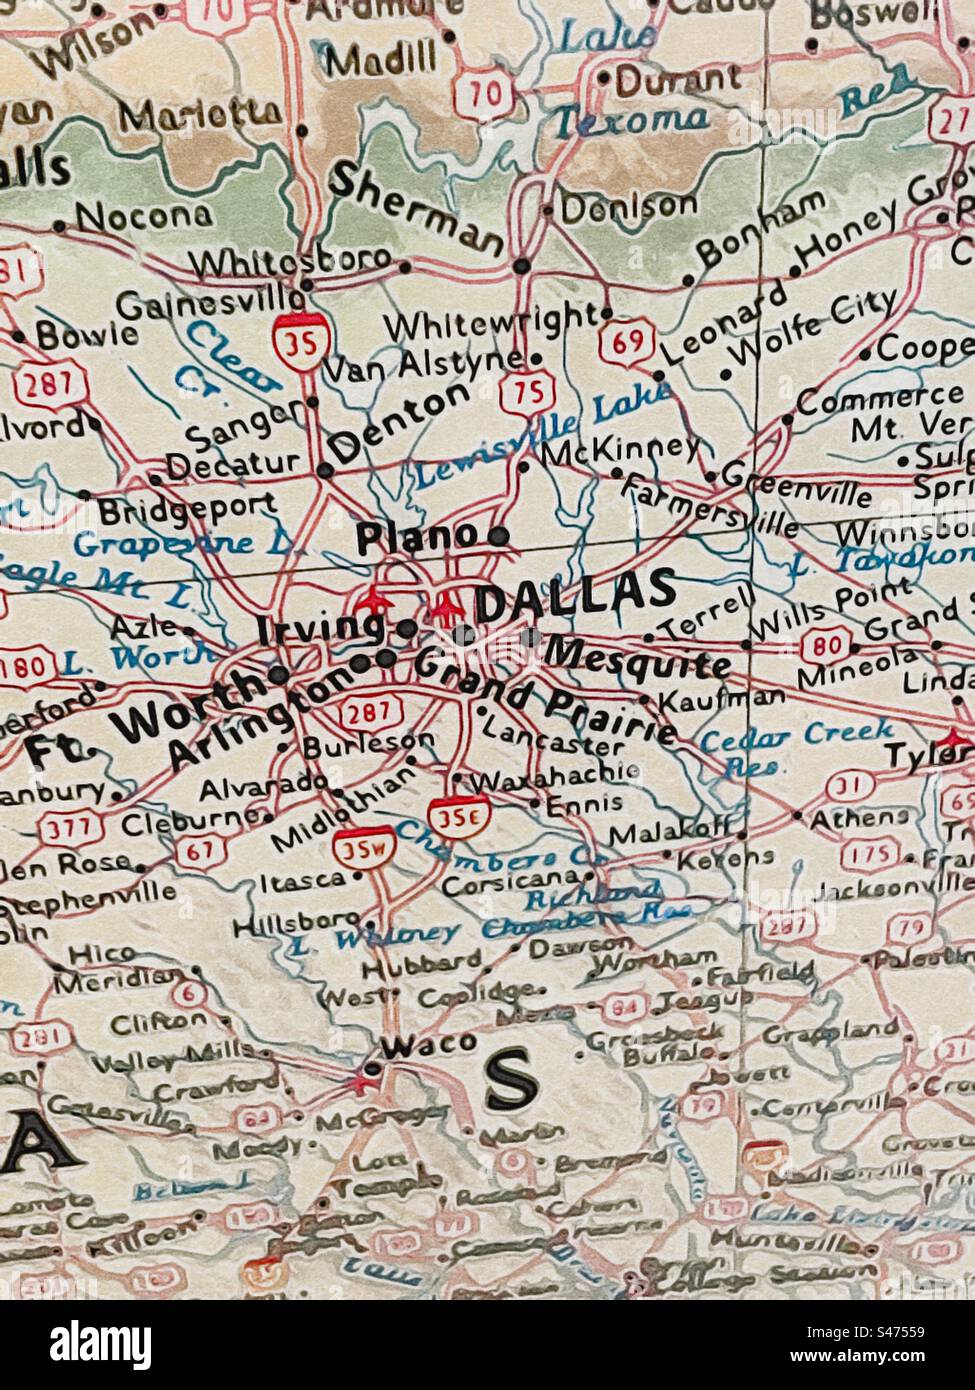 Zoomed image of the Dallas, Texas area on a US map. Original photo has been made into an “illustration” via the IOS app Brushstroke. Stock Photo